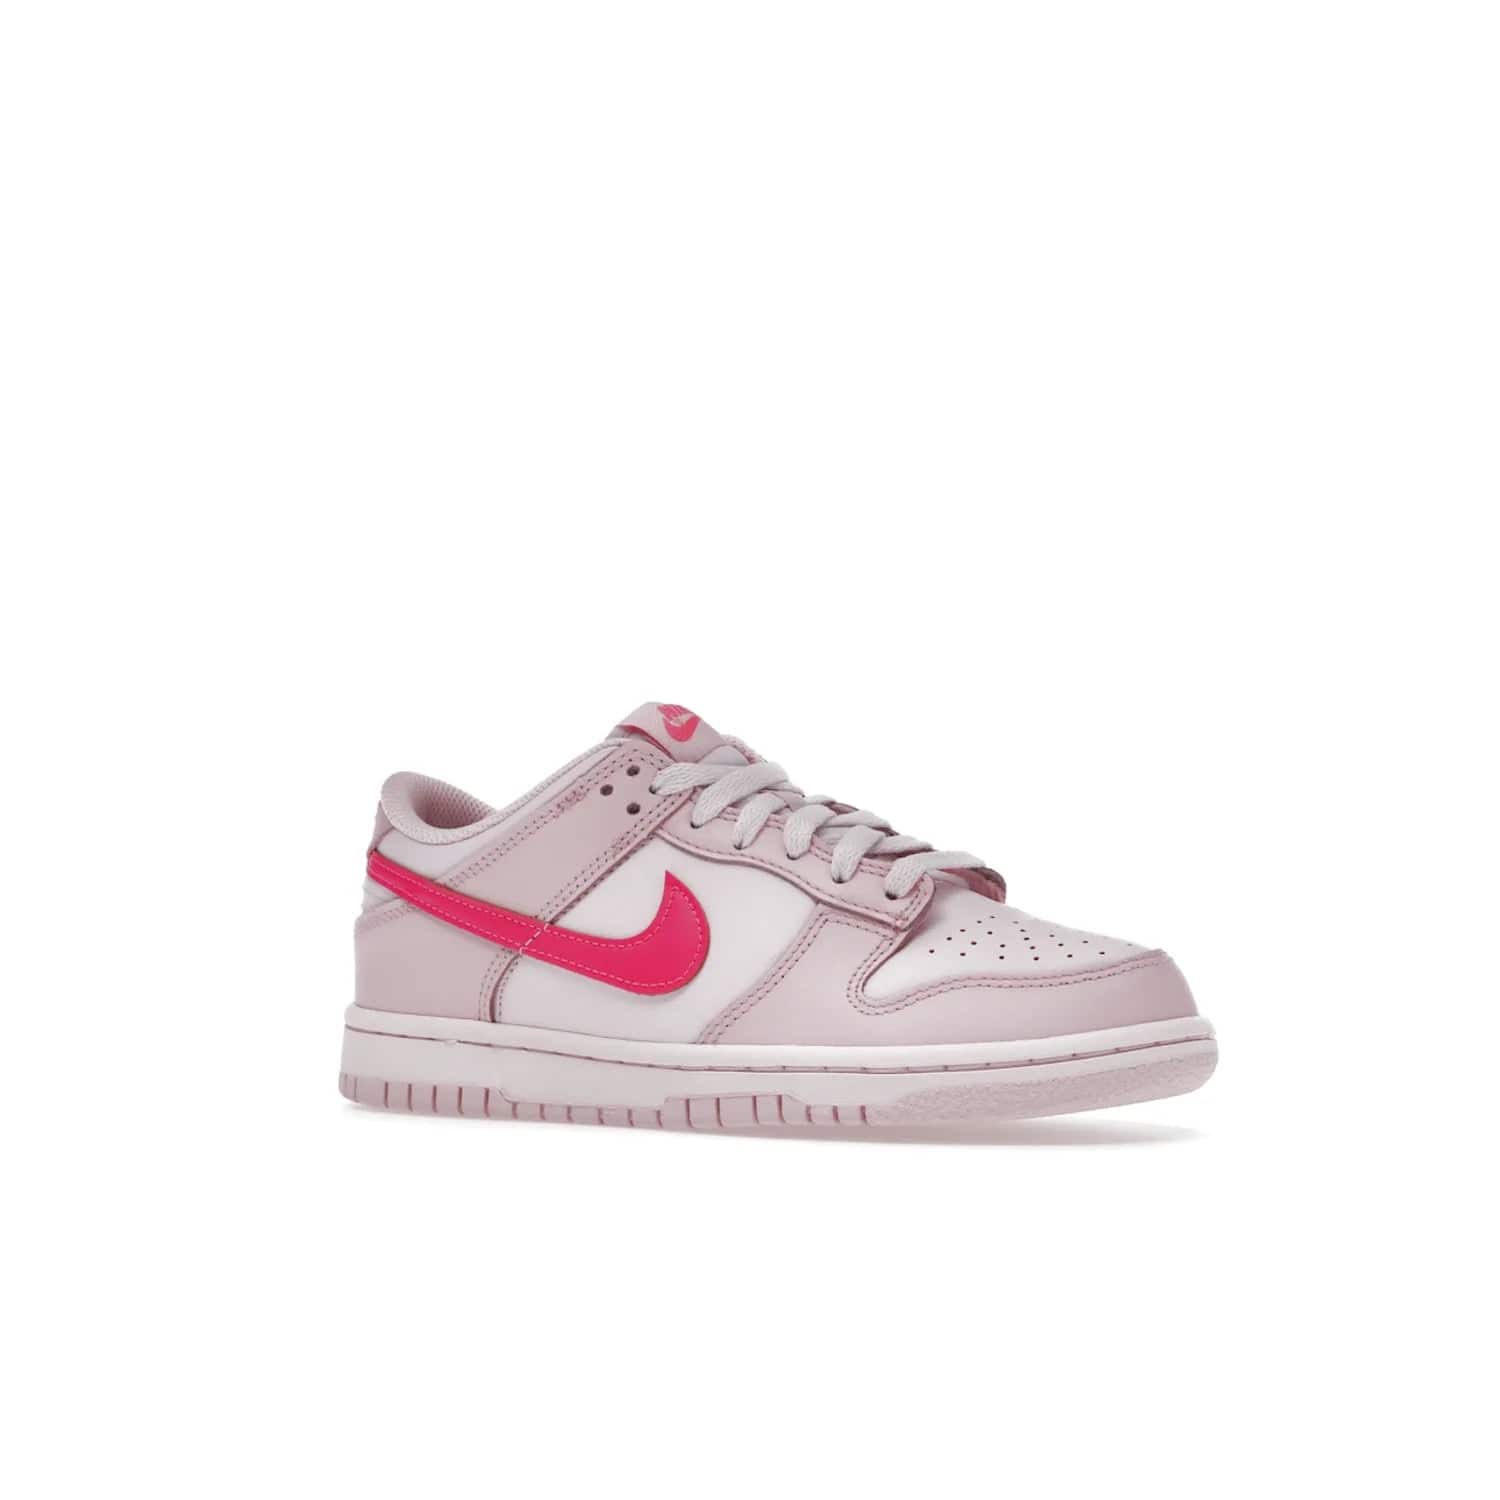 Nike Dunk Low Triple Pink (GS) - Image 4 - Only at www.BallersClubKickz.com - The Nike Dunk Low Triple Pink provides bold style in GS sizing. Featuring 3 distinct shades of pink and Nike branding, the shoe stands out.